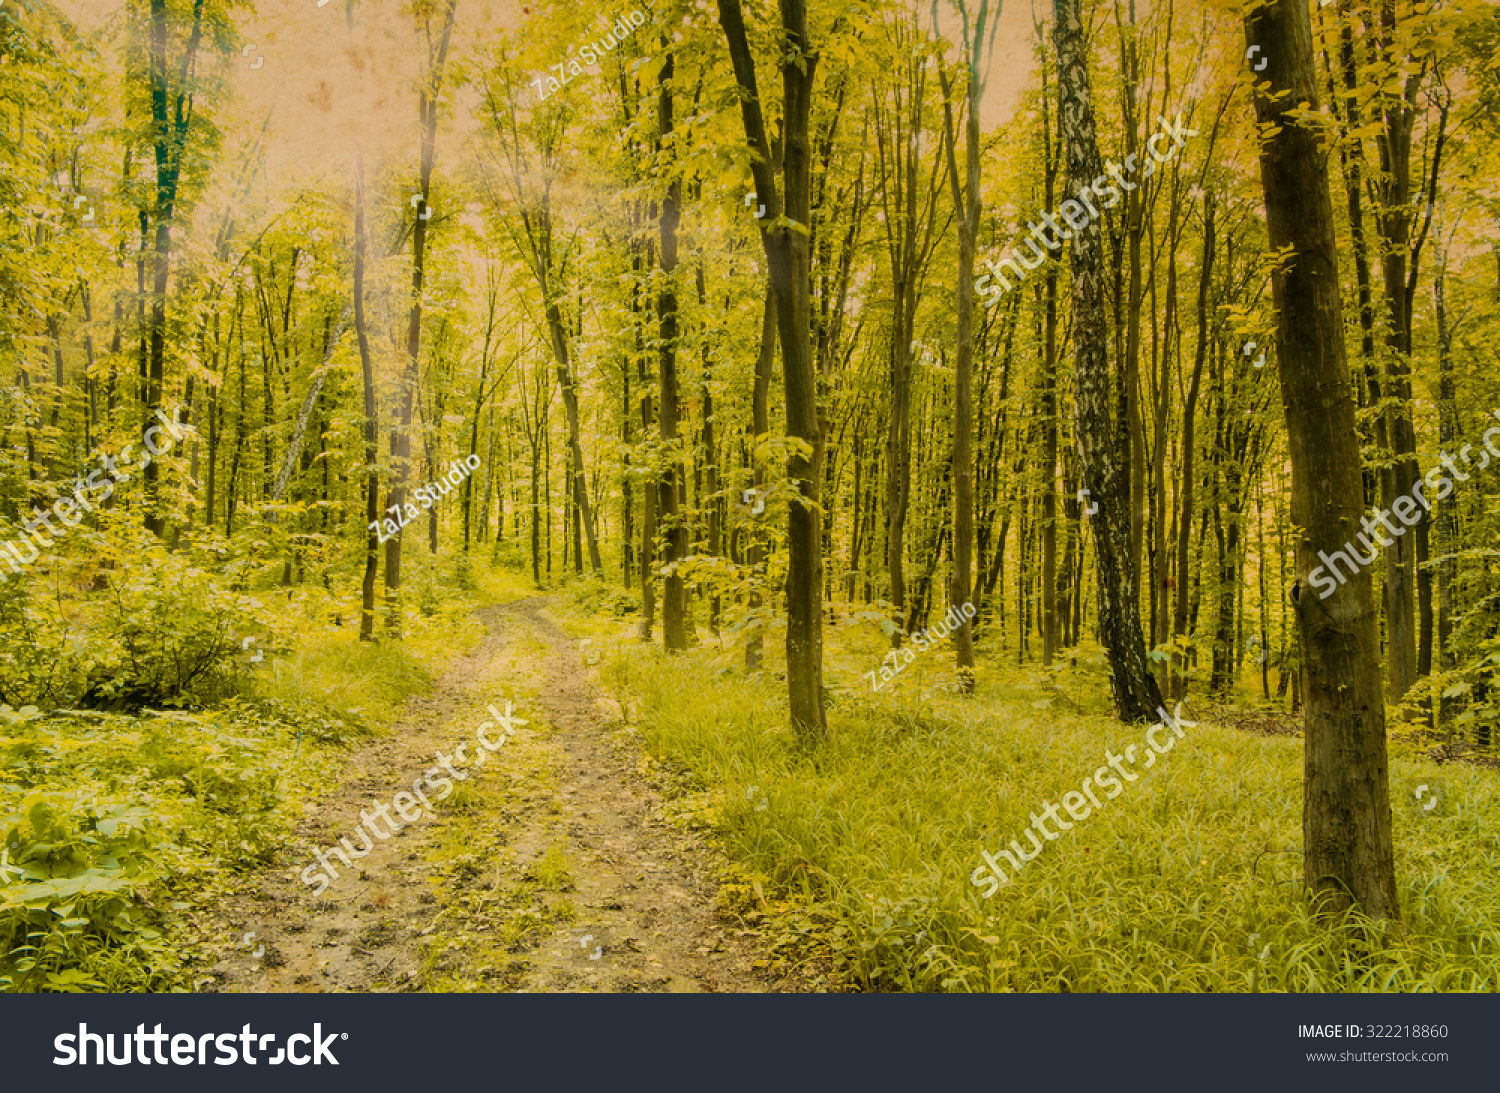 Nature background of green forest #322218860